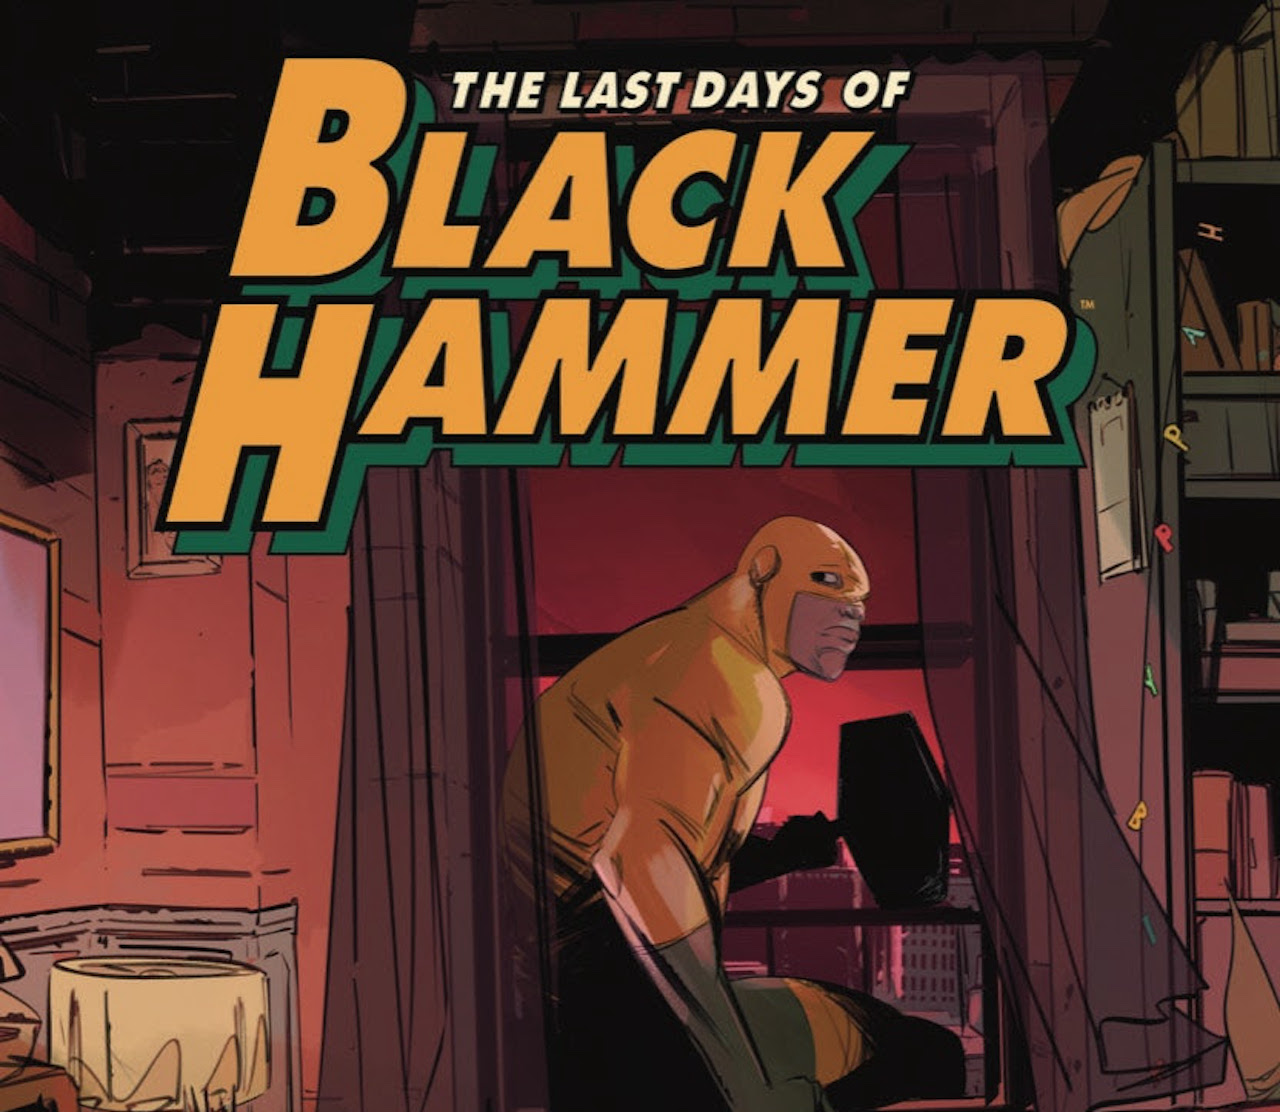 Dark Horse signals 'The Last Days of Black Hammer' coming to print